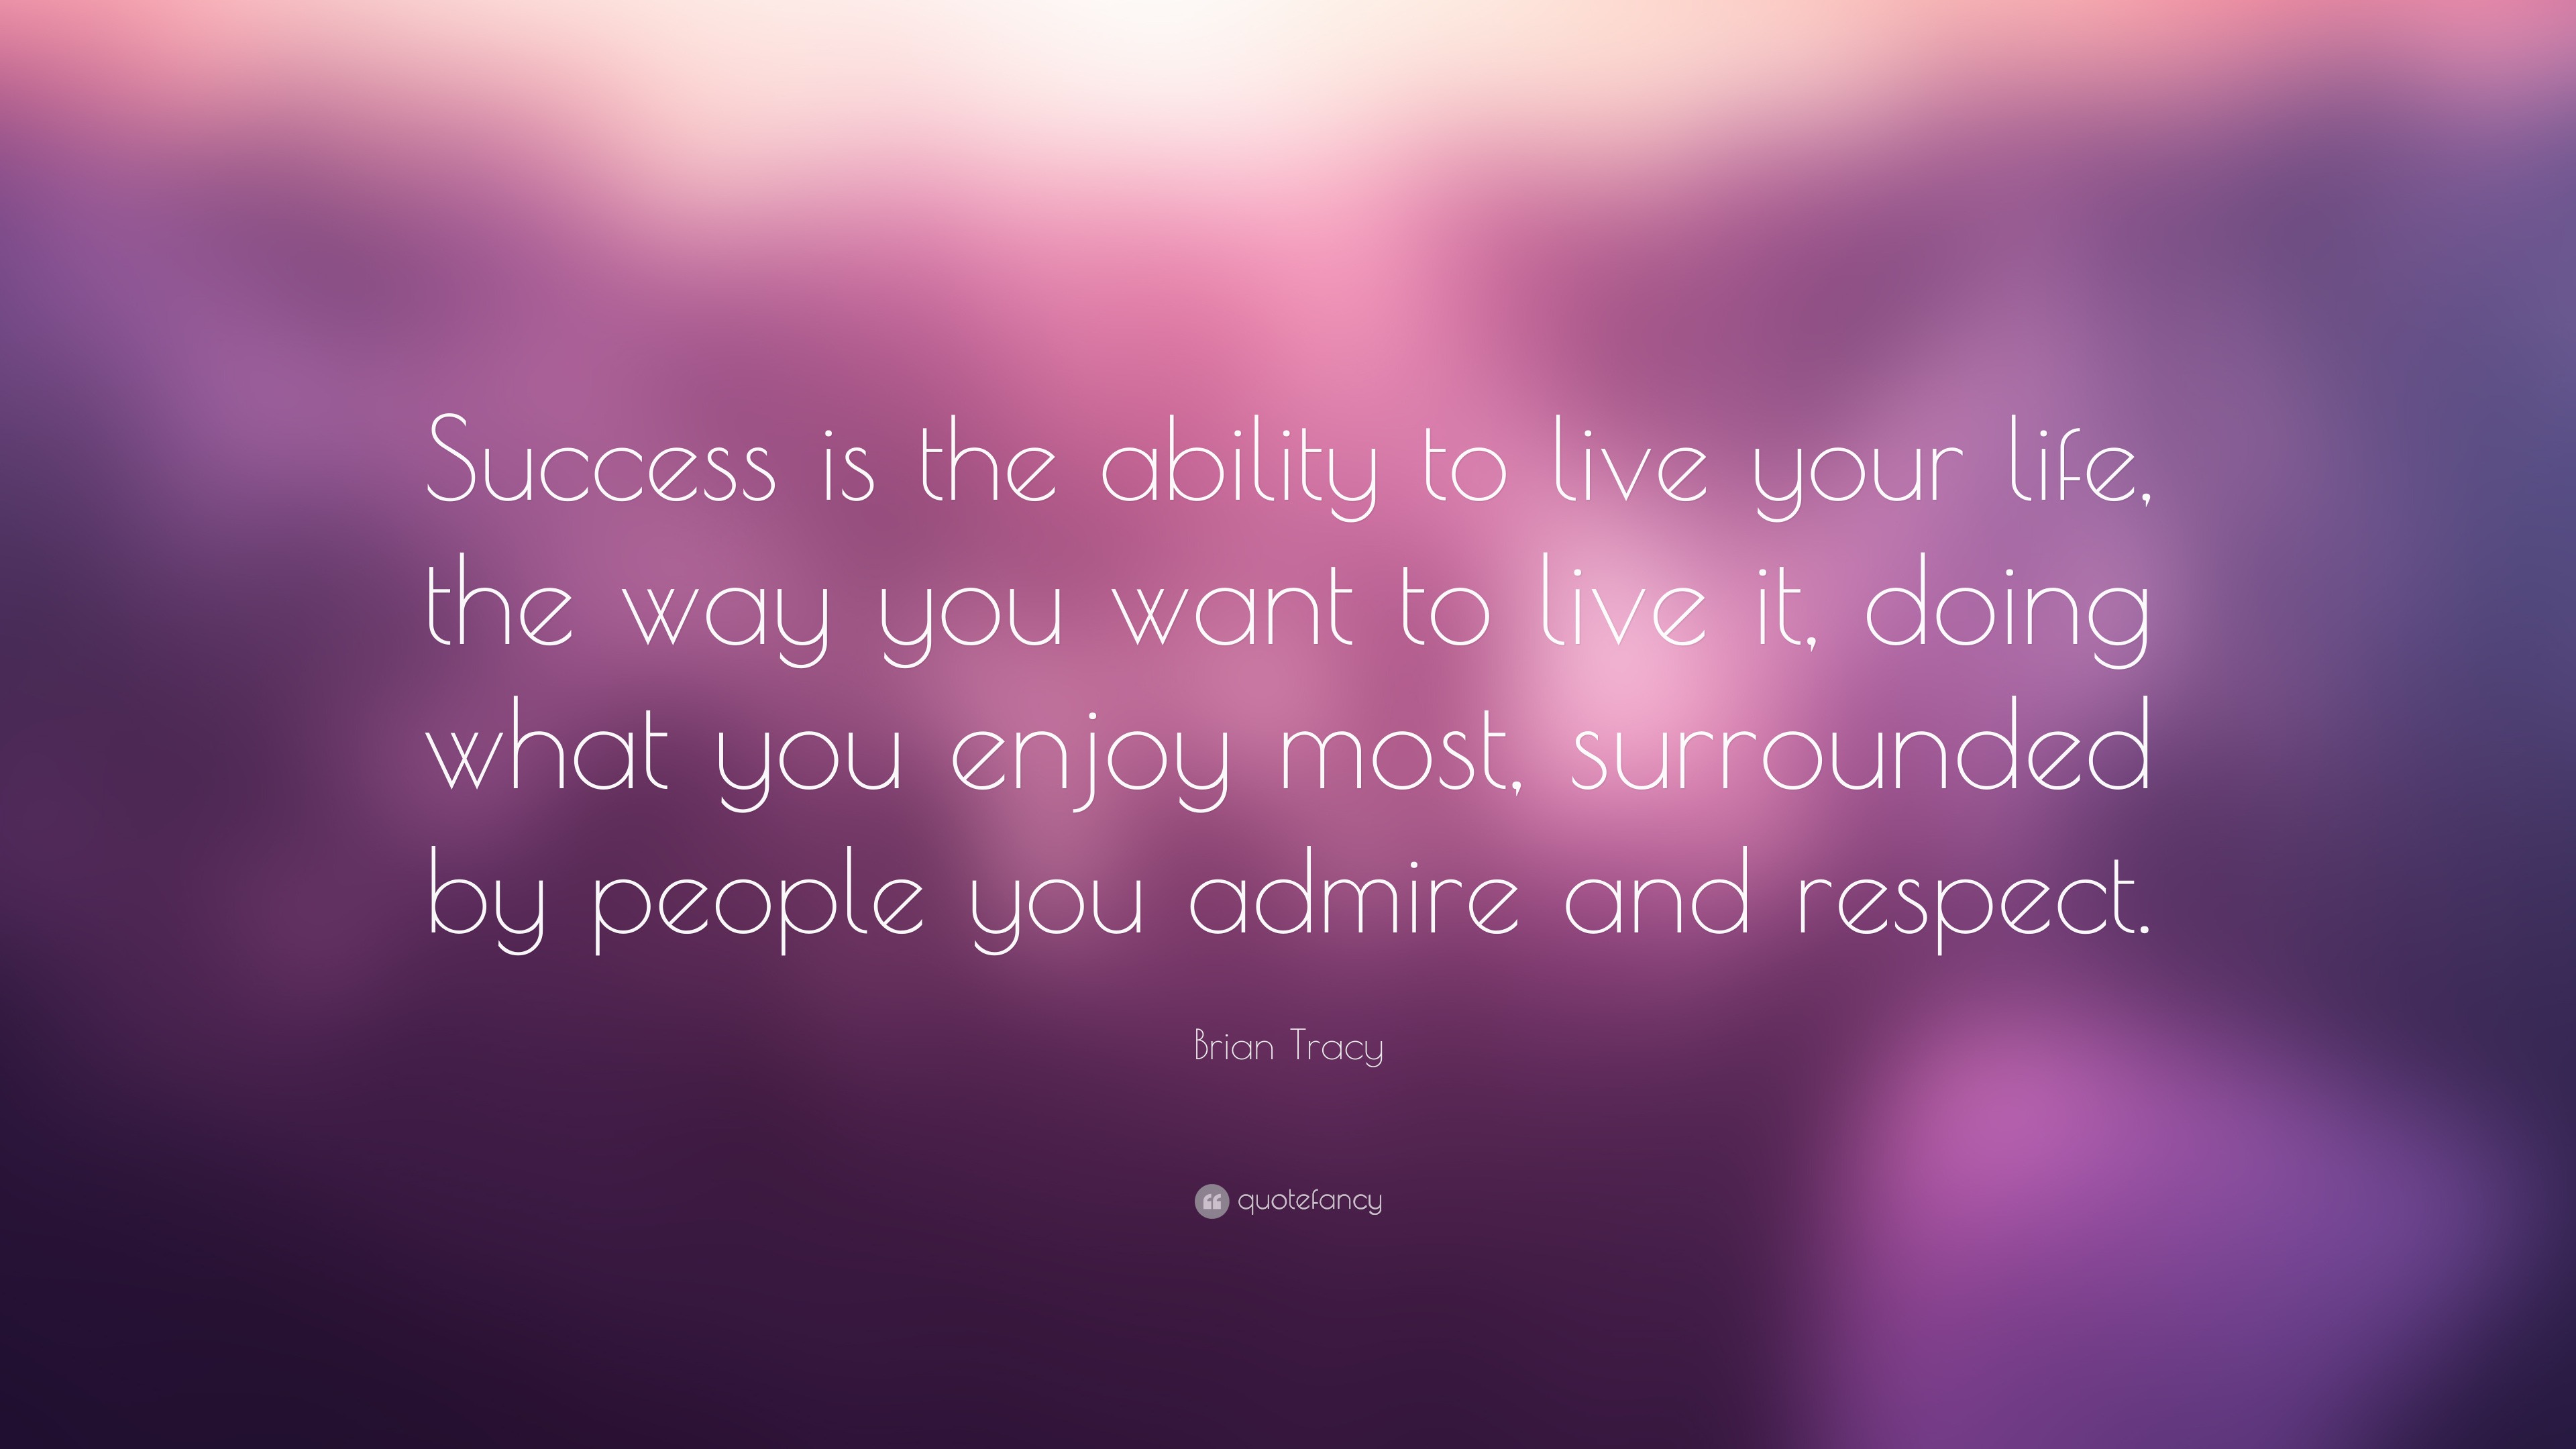 Brian Tracy Quote: “Success is the ability to live your life, the way ...